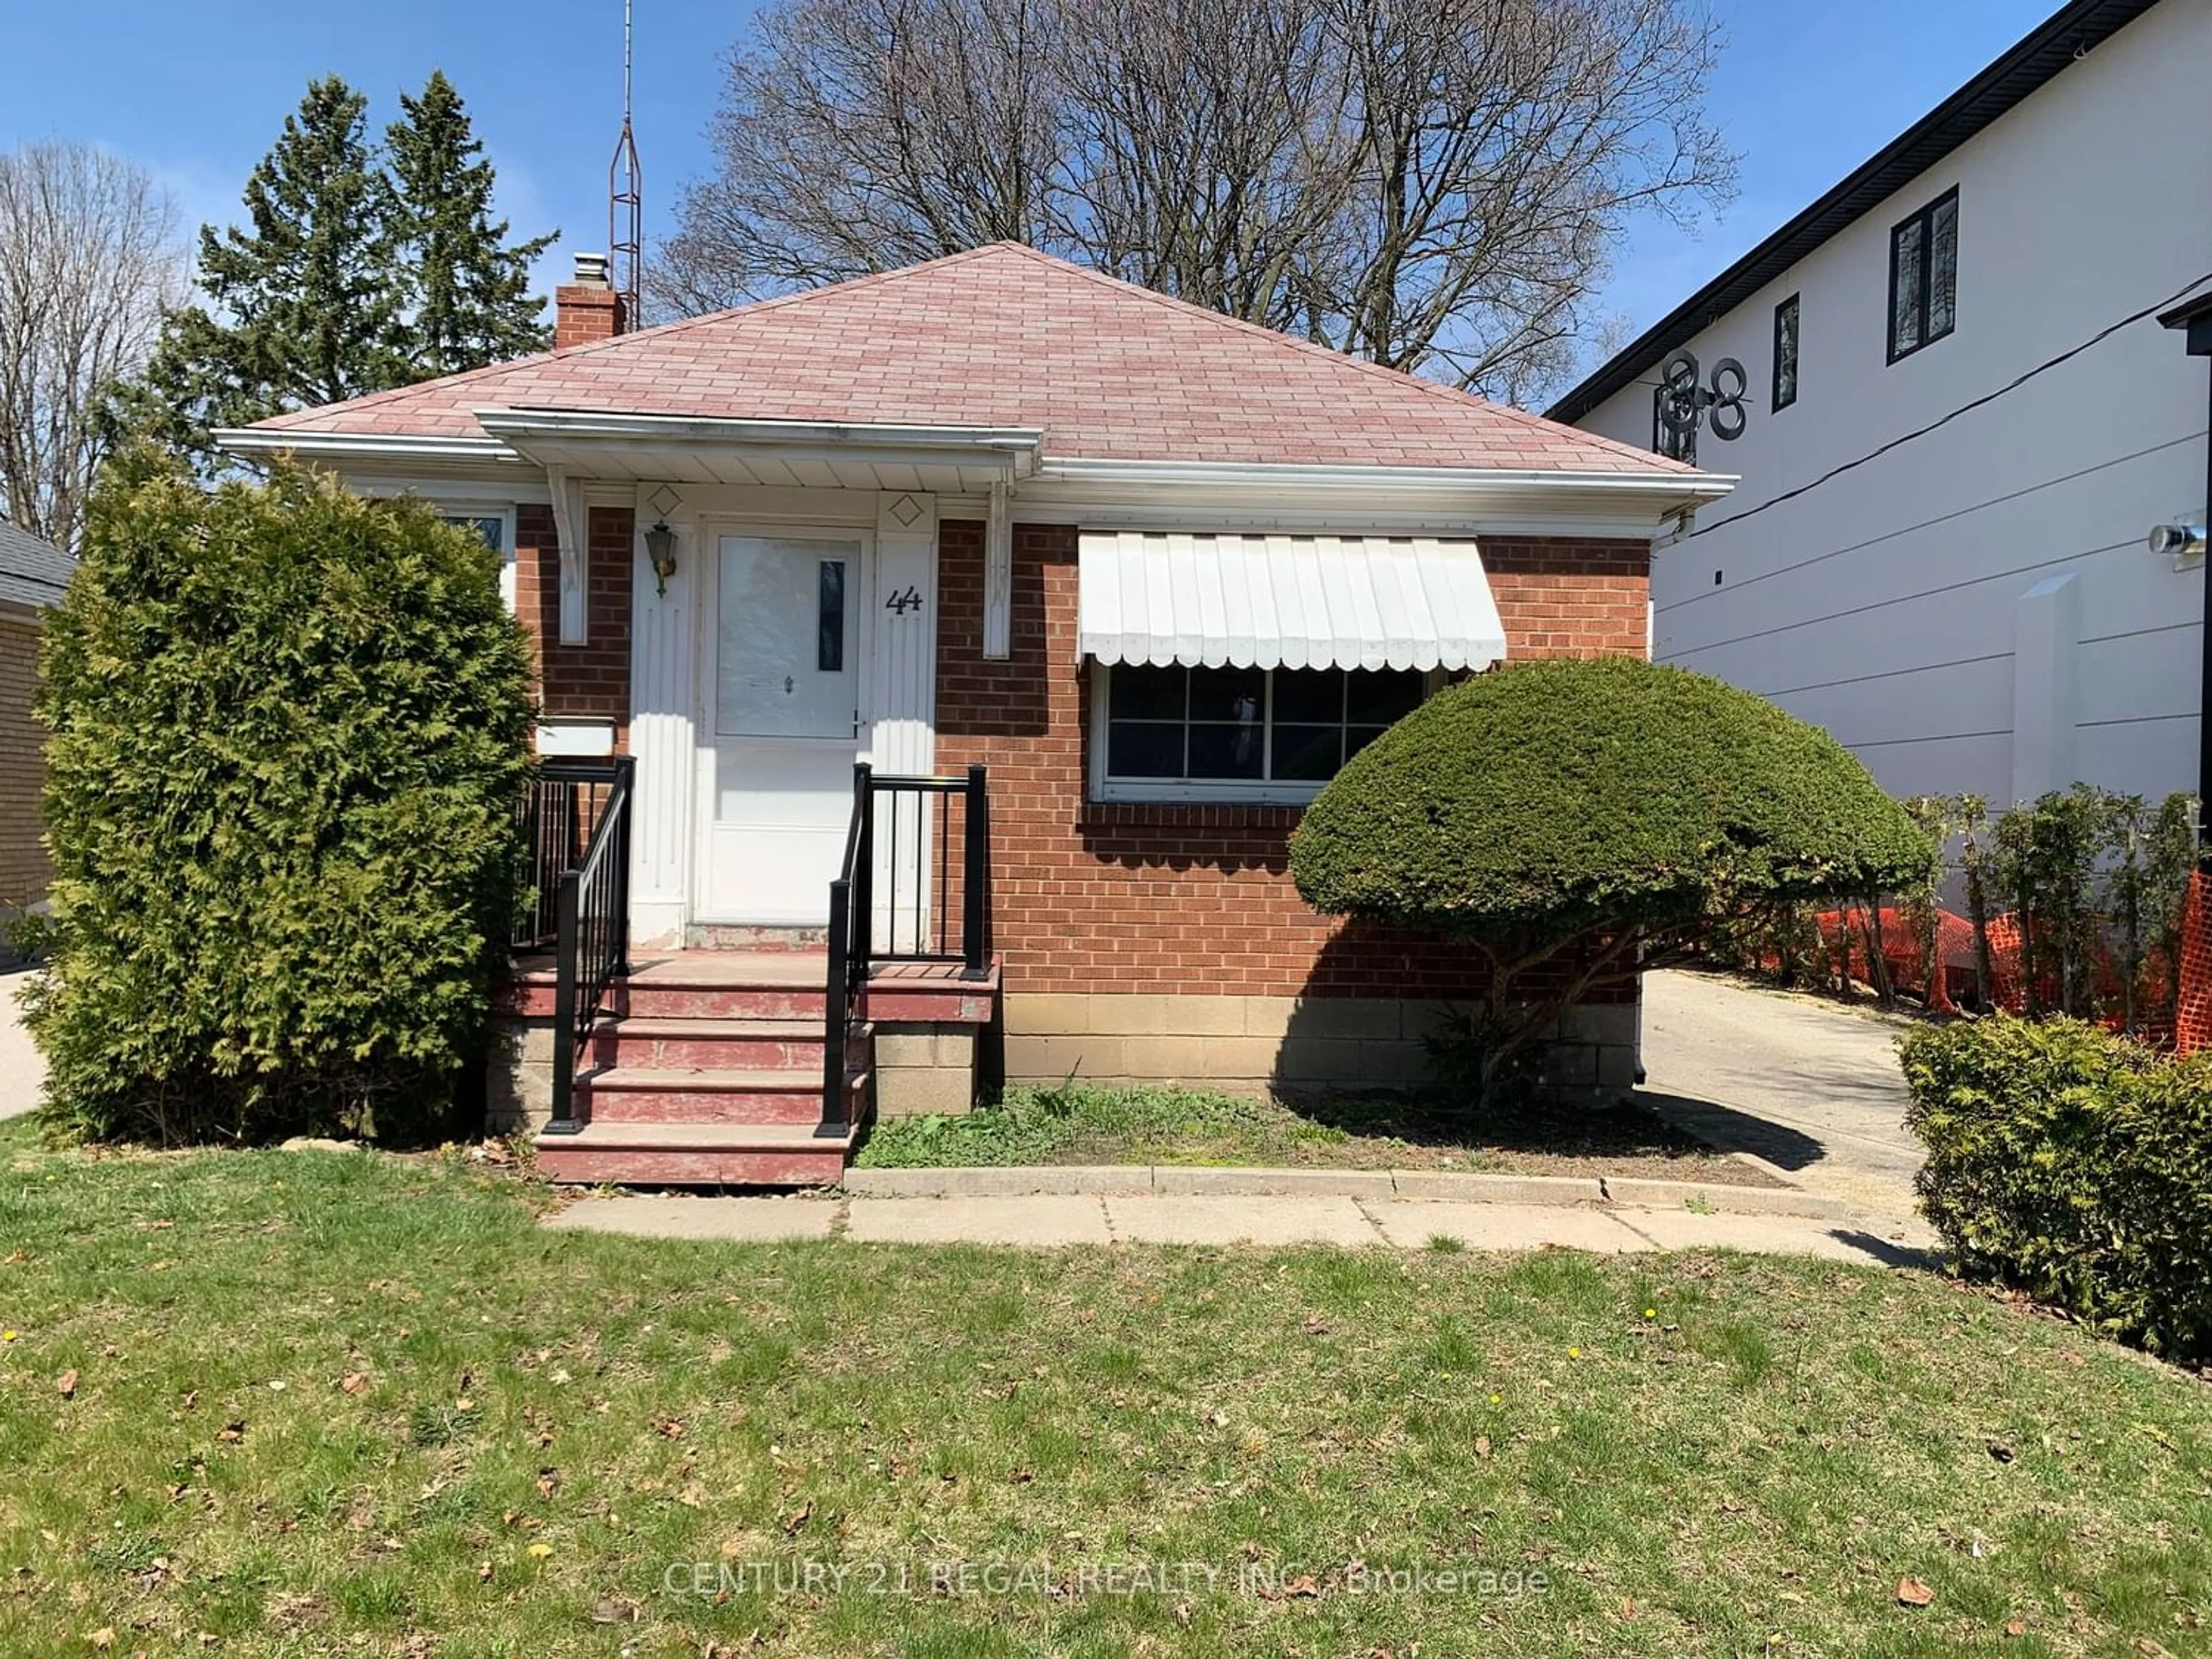 Frontside or backside of a home for 44 Edgecroft Rd, Toronto Ontario M8Z 2B8